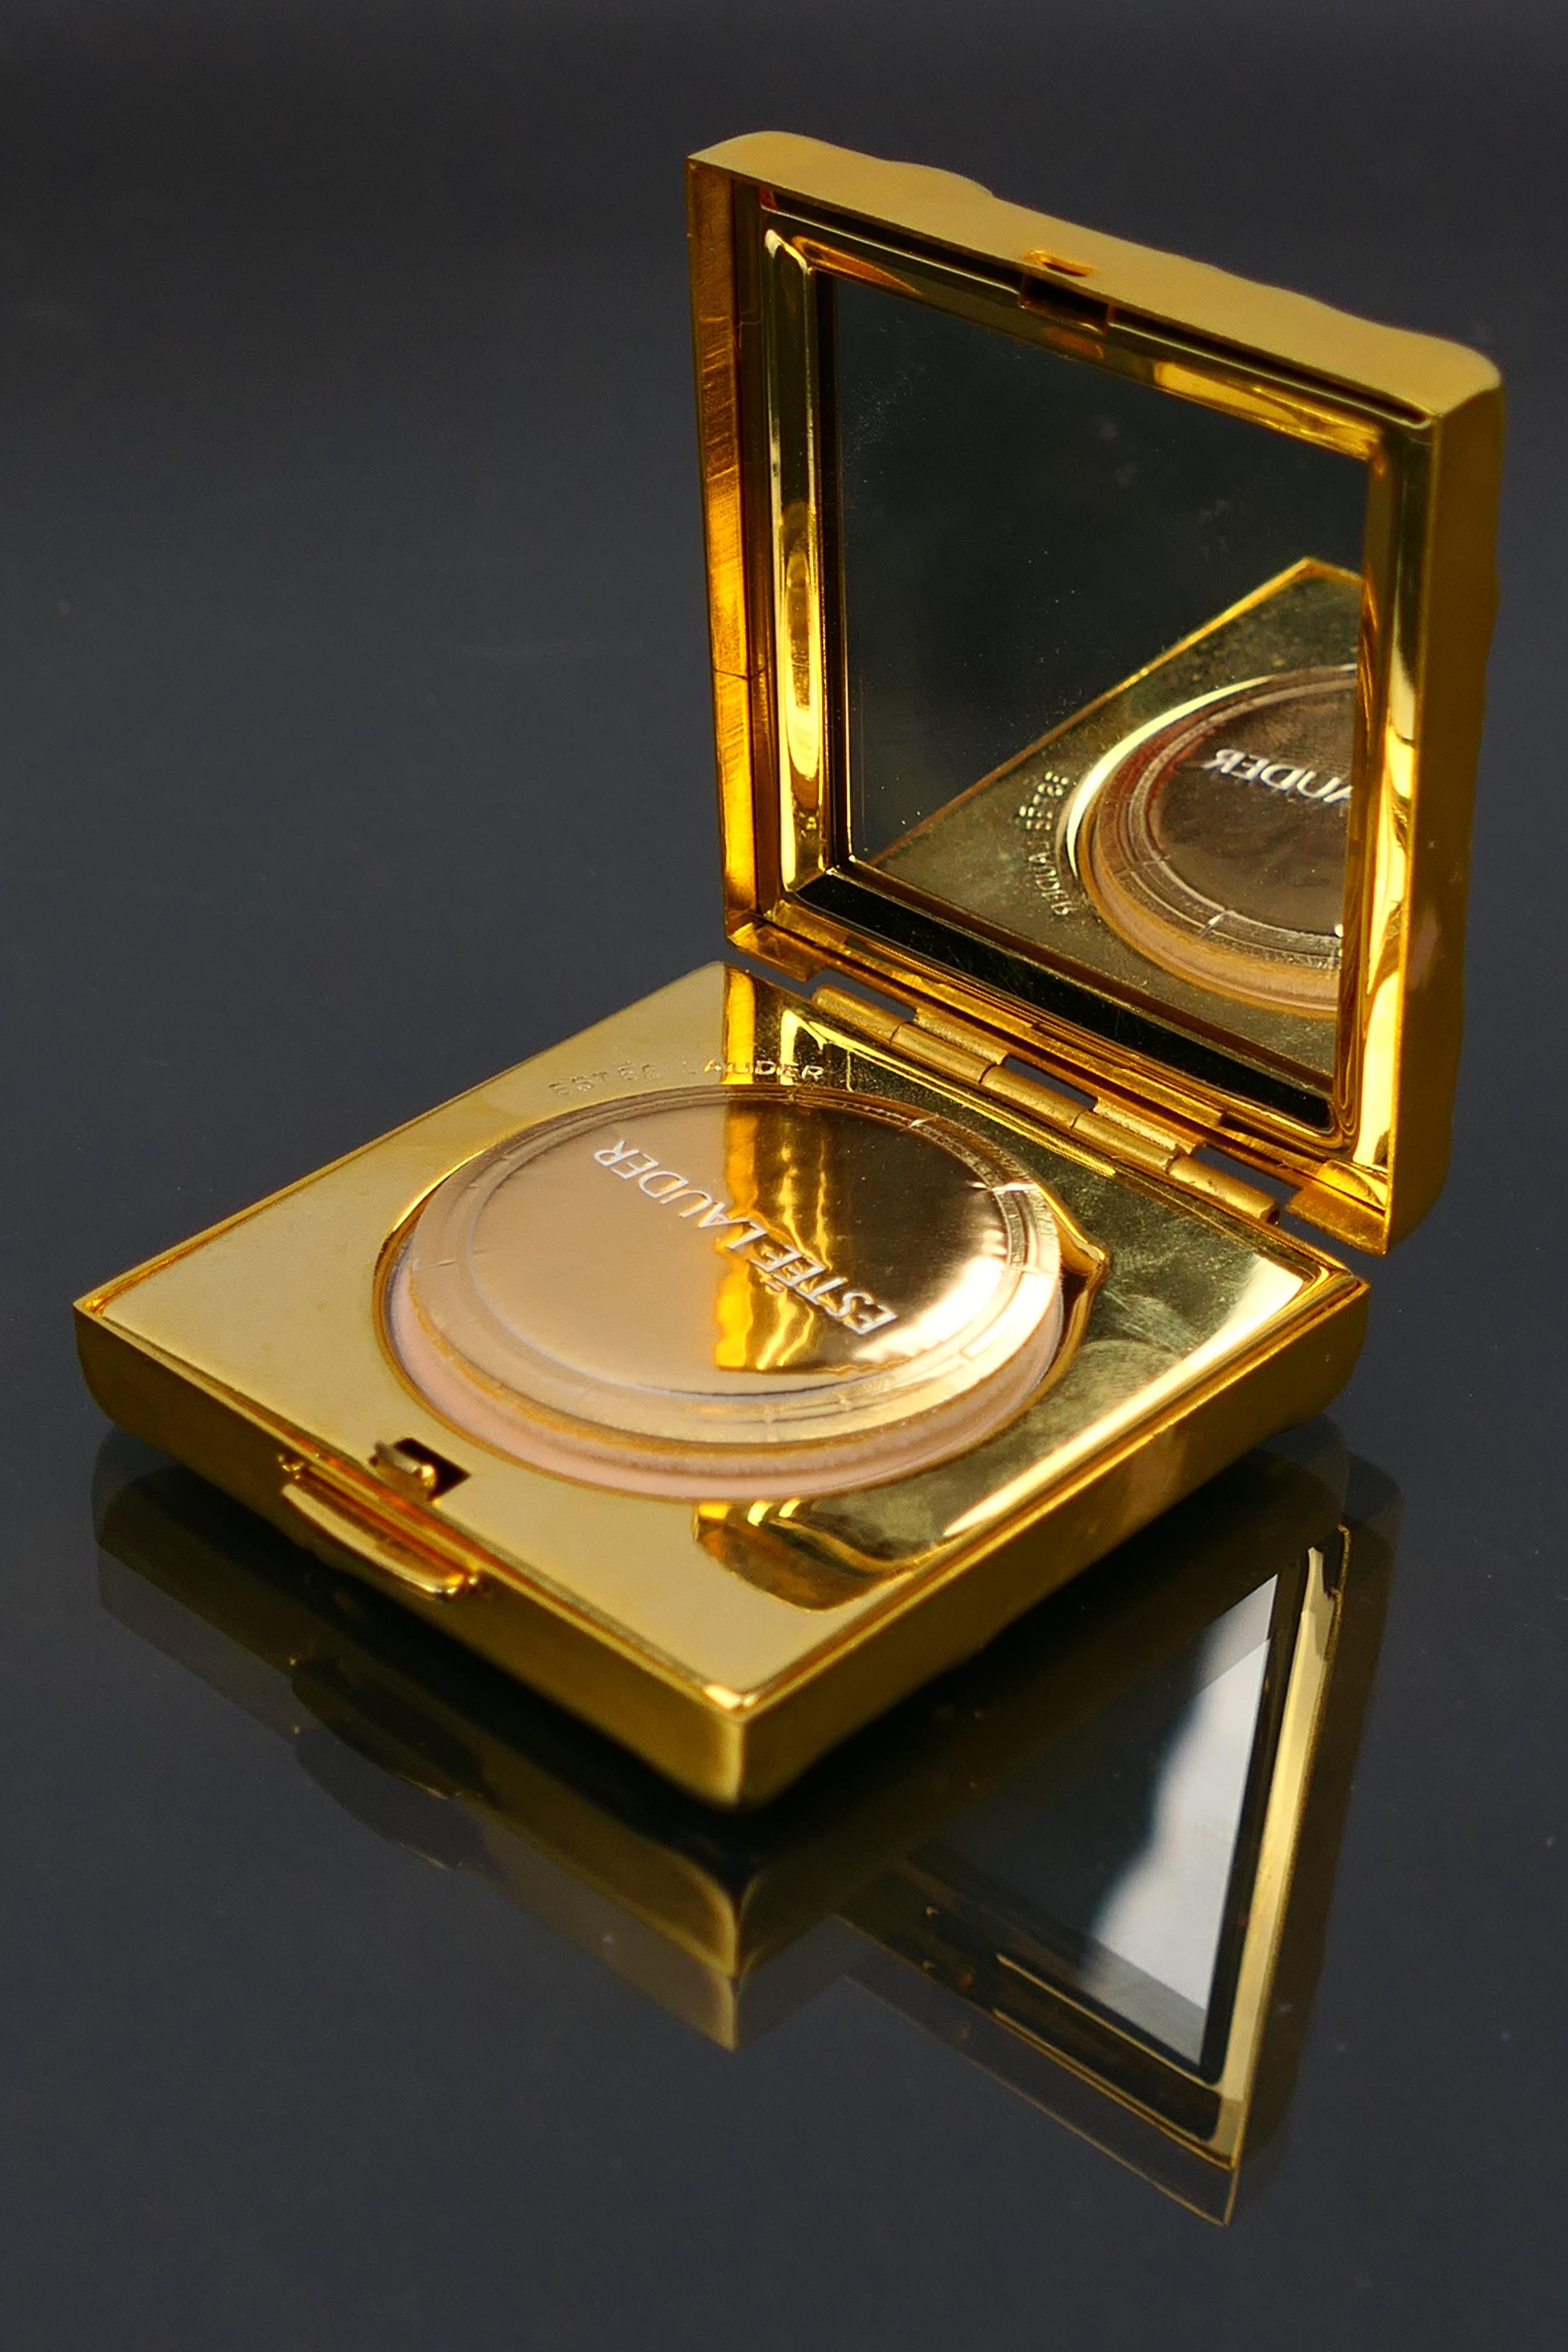 Estee Lauder - 2 x boxed gilt metal Estee Lauder powder compacts - Lot includes a Bamboo Weave - Image 4 of 10